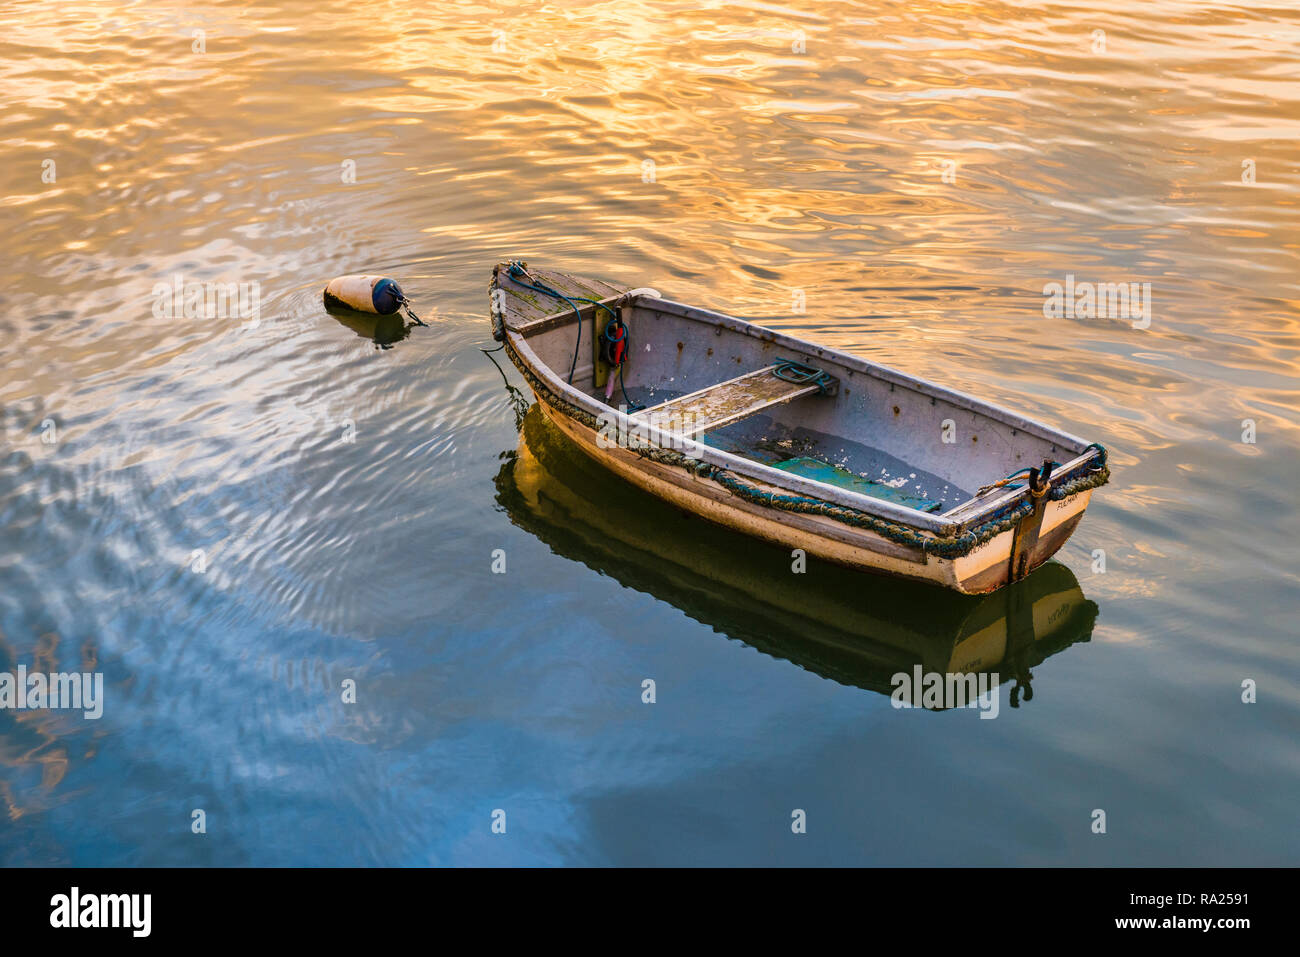 River Wear Fish Quay, fishing boat in foreground, sunset producing a stunning array of colours & reflections Stock Photo